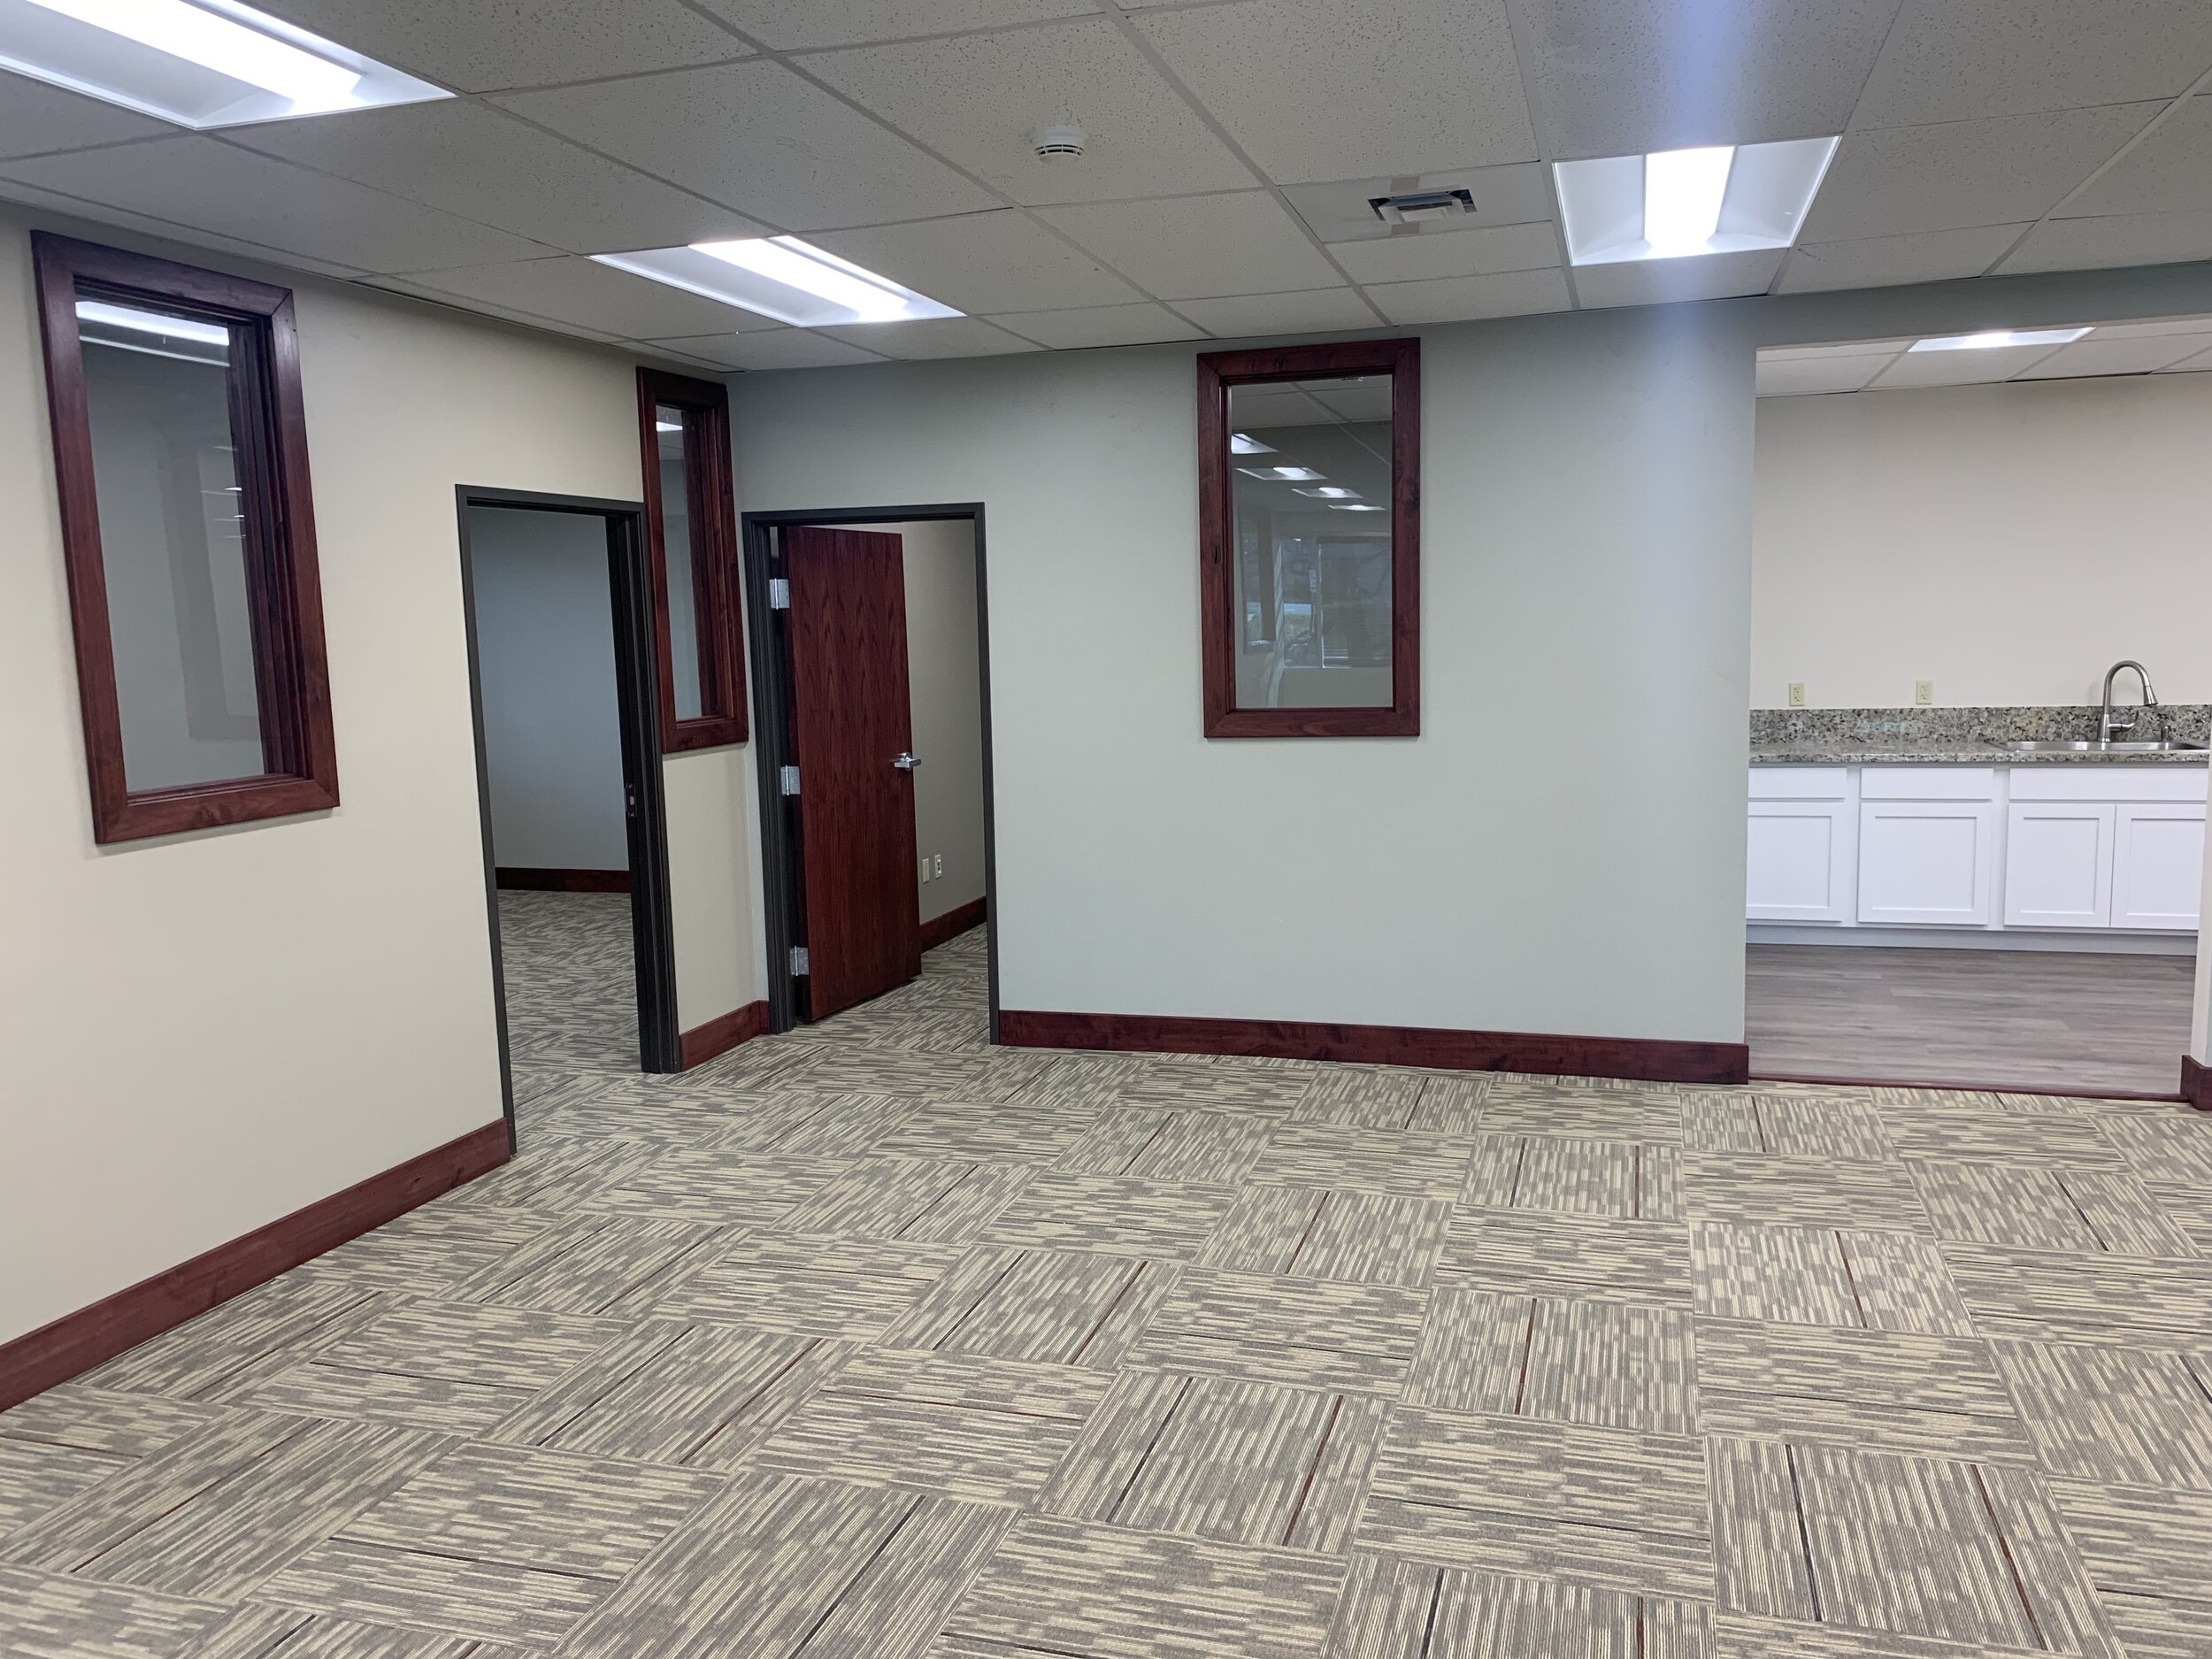 Office, Conference Room, Breakroom